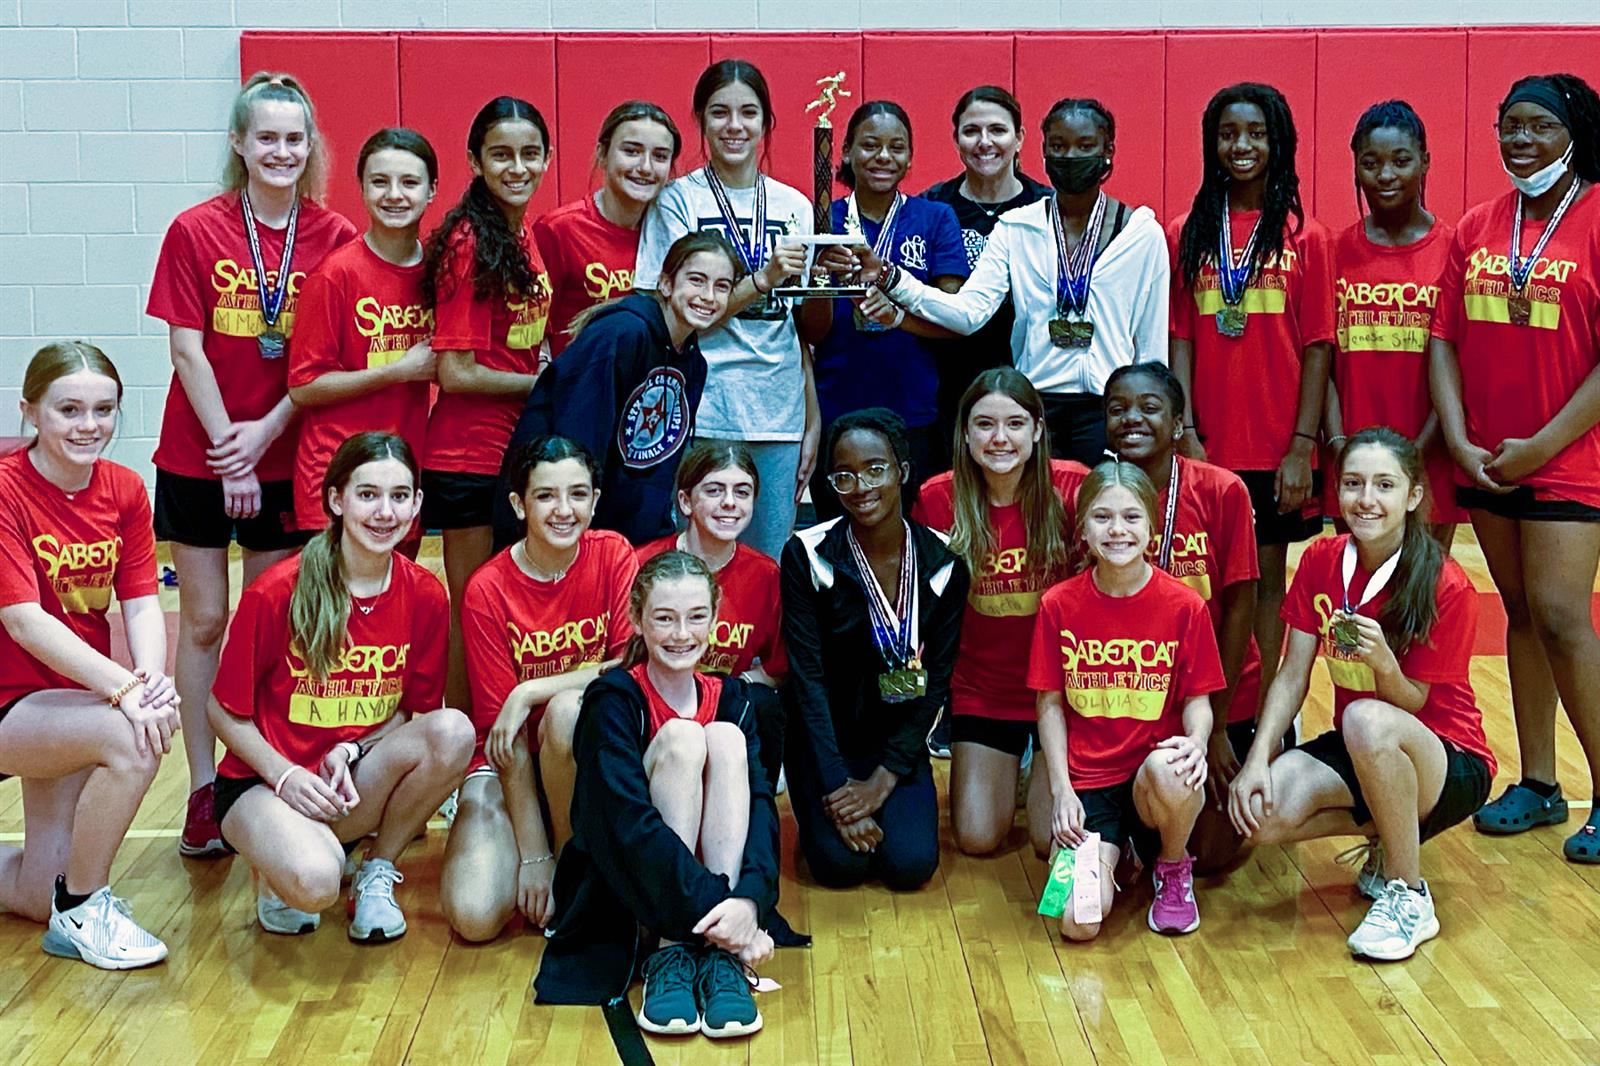 Smith Middle School won the seventh grade girls’ track and field title with 121 points.